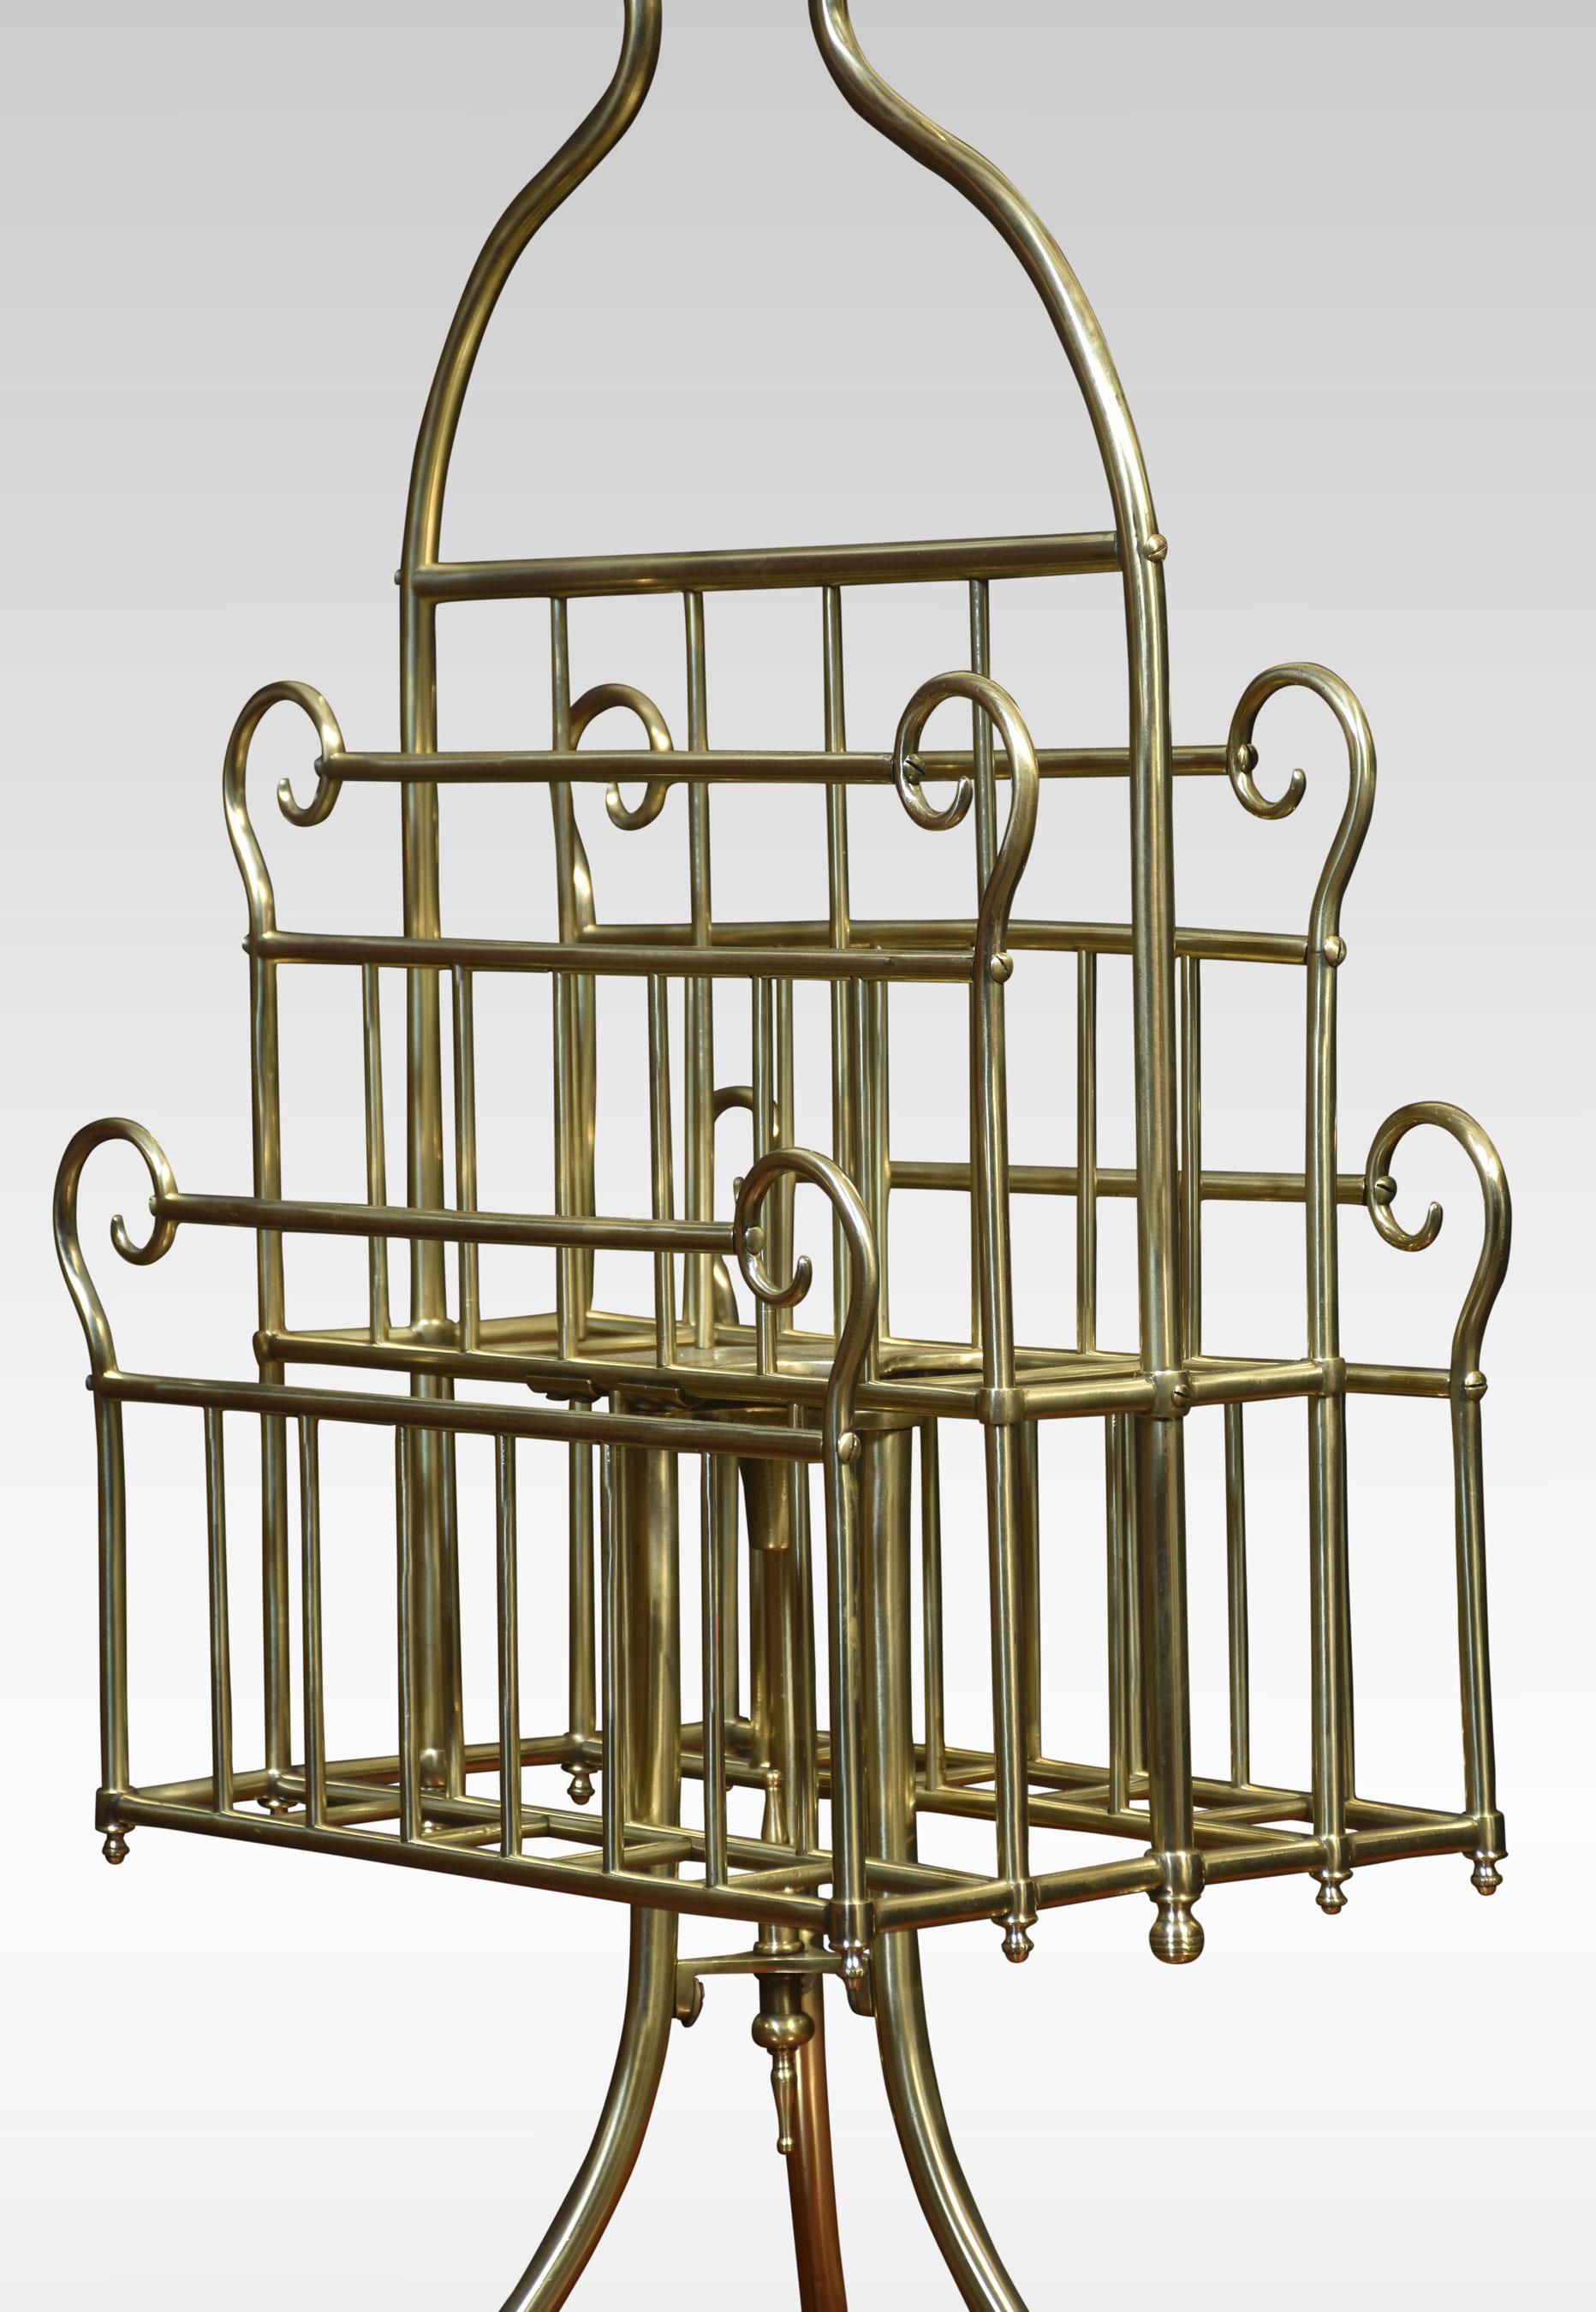 Brass music / magazine rack with scrolled and railed divisions, on three out splayed supports termanating in paw feet.
Dimensions
Height 32.5 Inches
Width 18.5 Inches
Depth 18.5 Inches